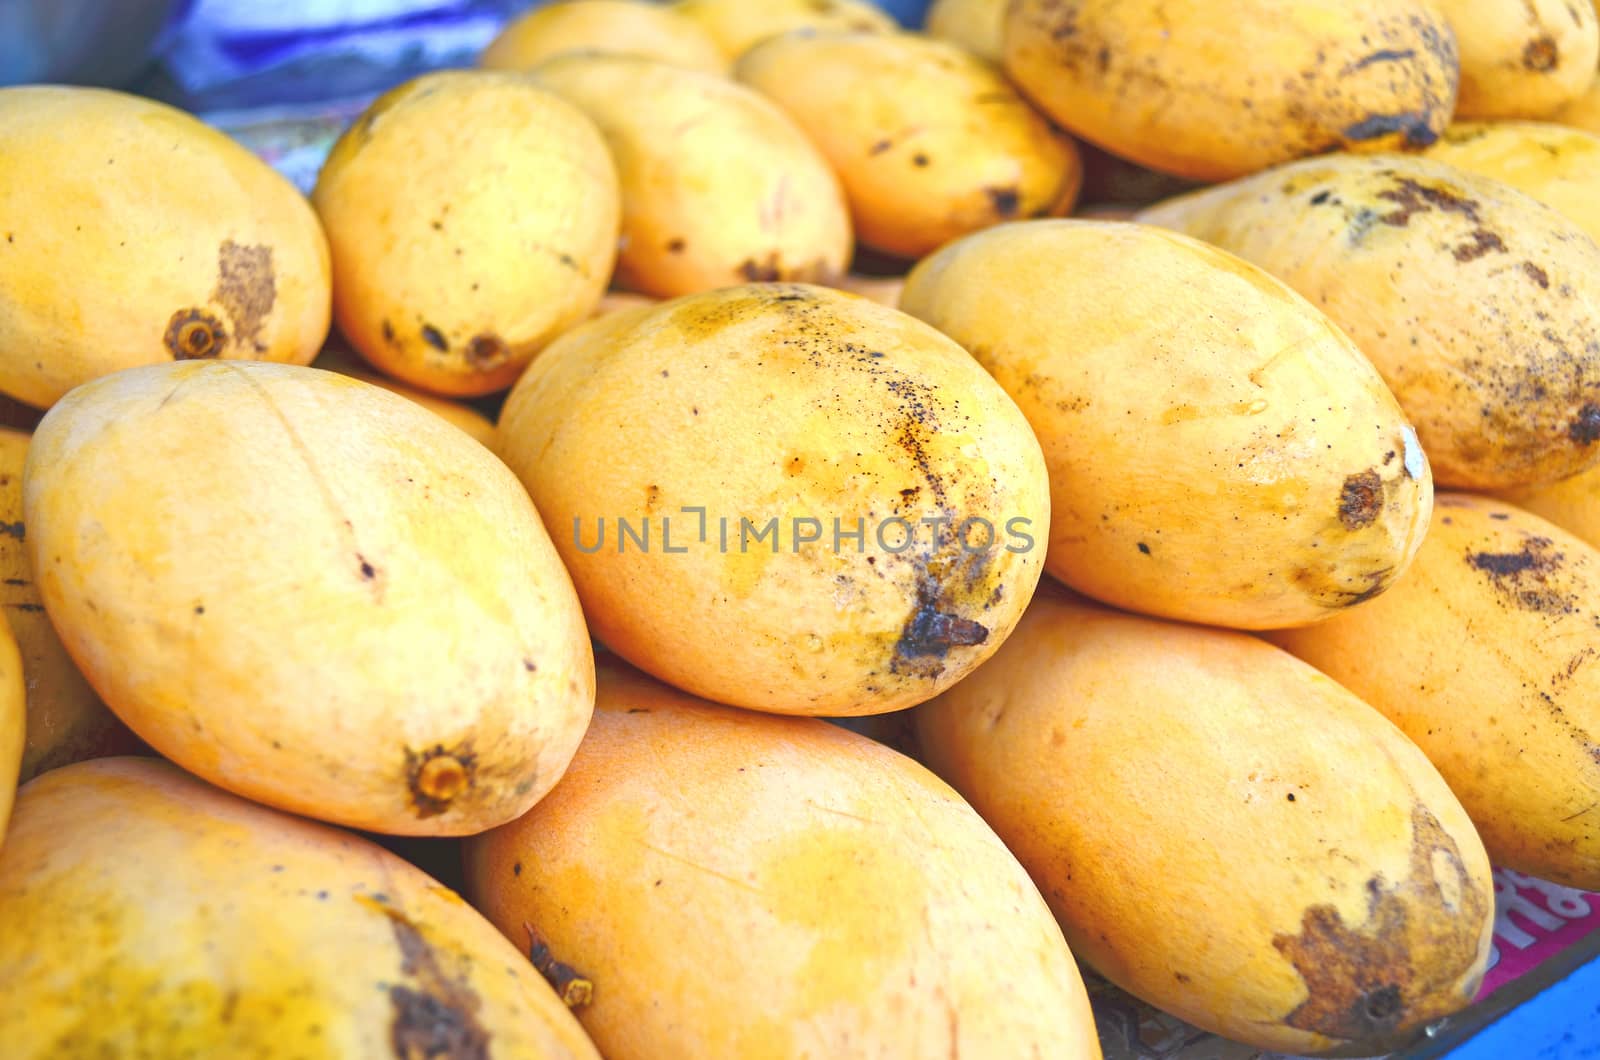 The mangos is a famous Thai sweet fruit.